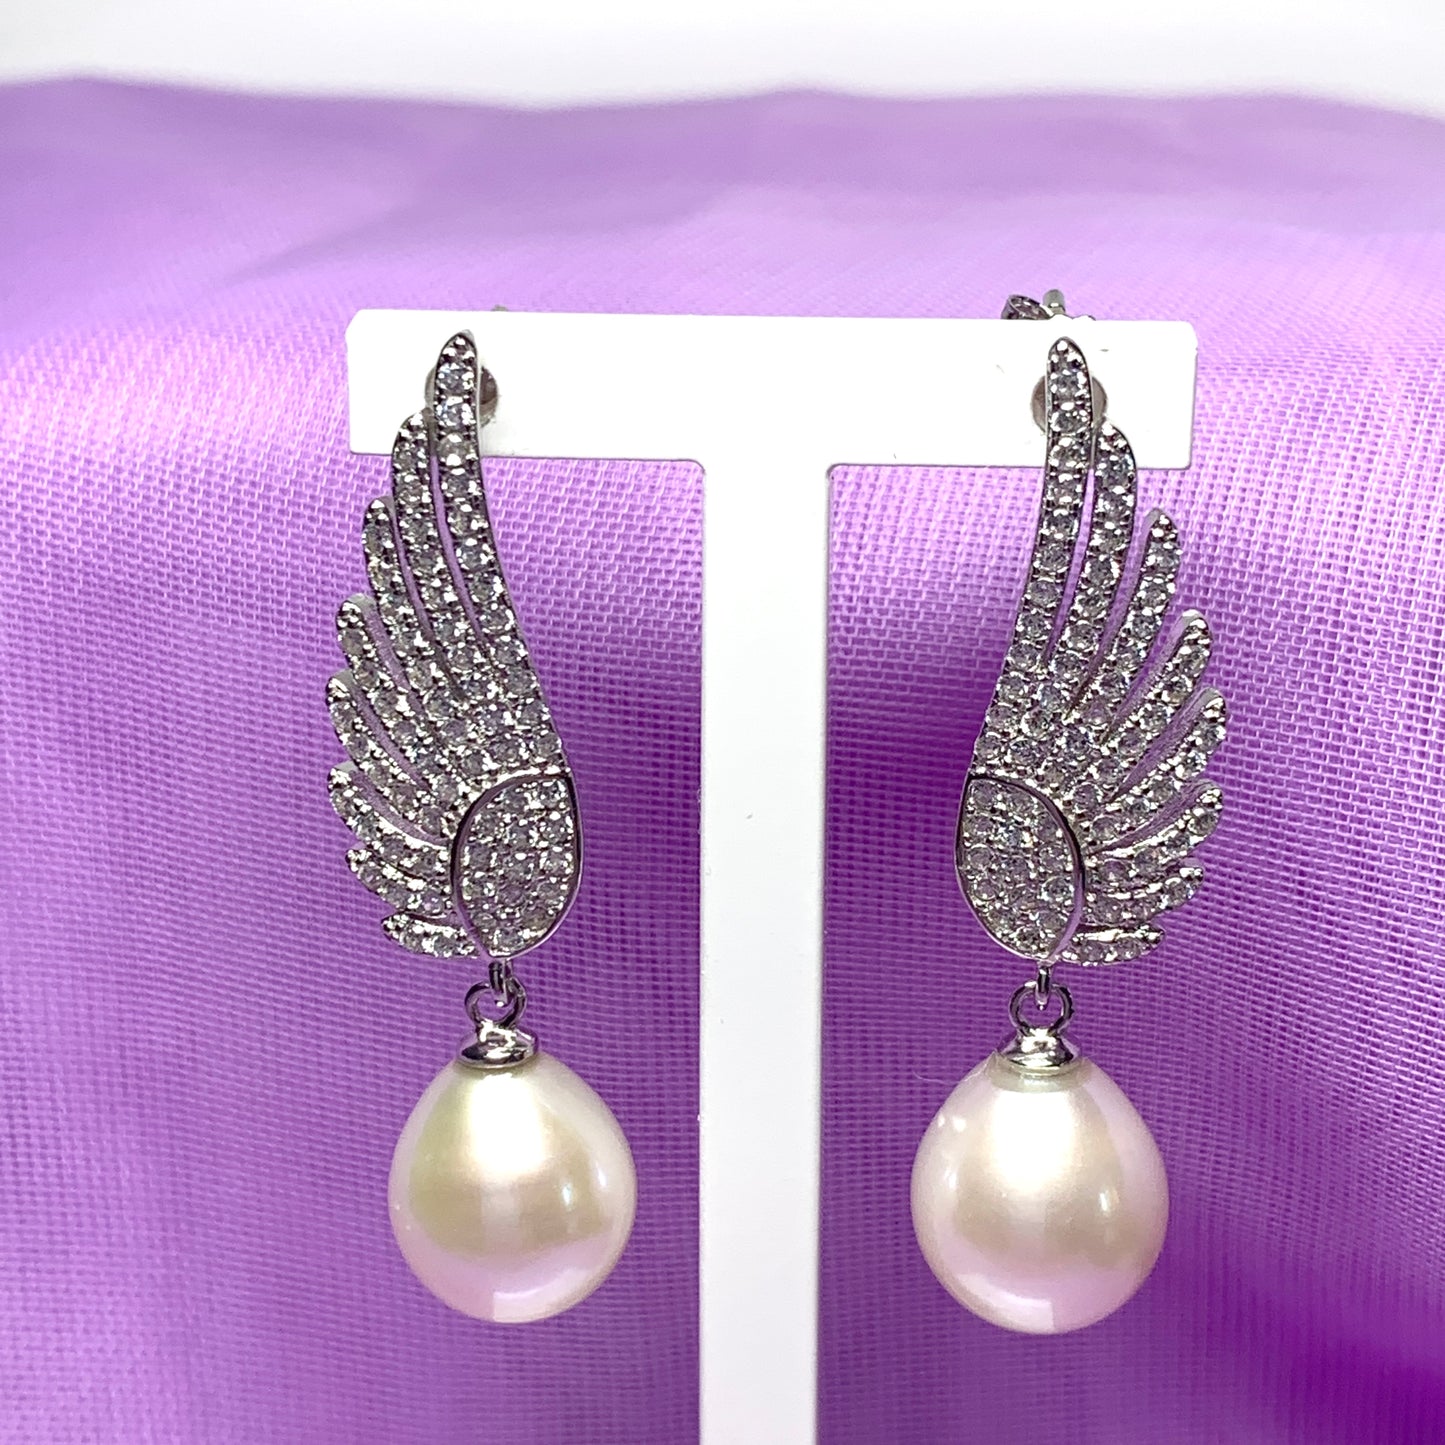 Sterling Silver Angle Wing Stud Earrings with Fresh Water Pearl and Cubic Zirconia